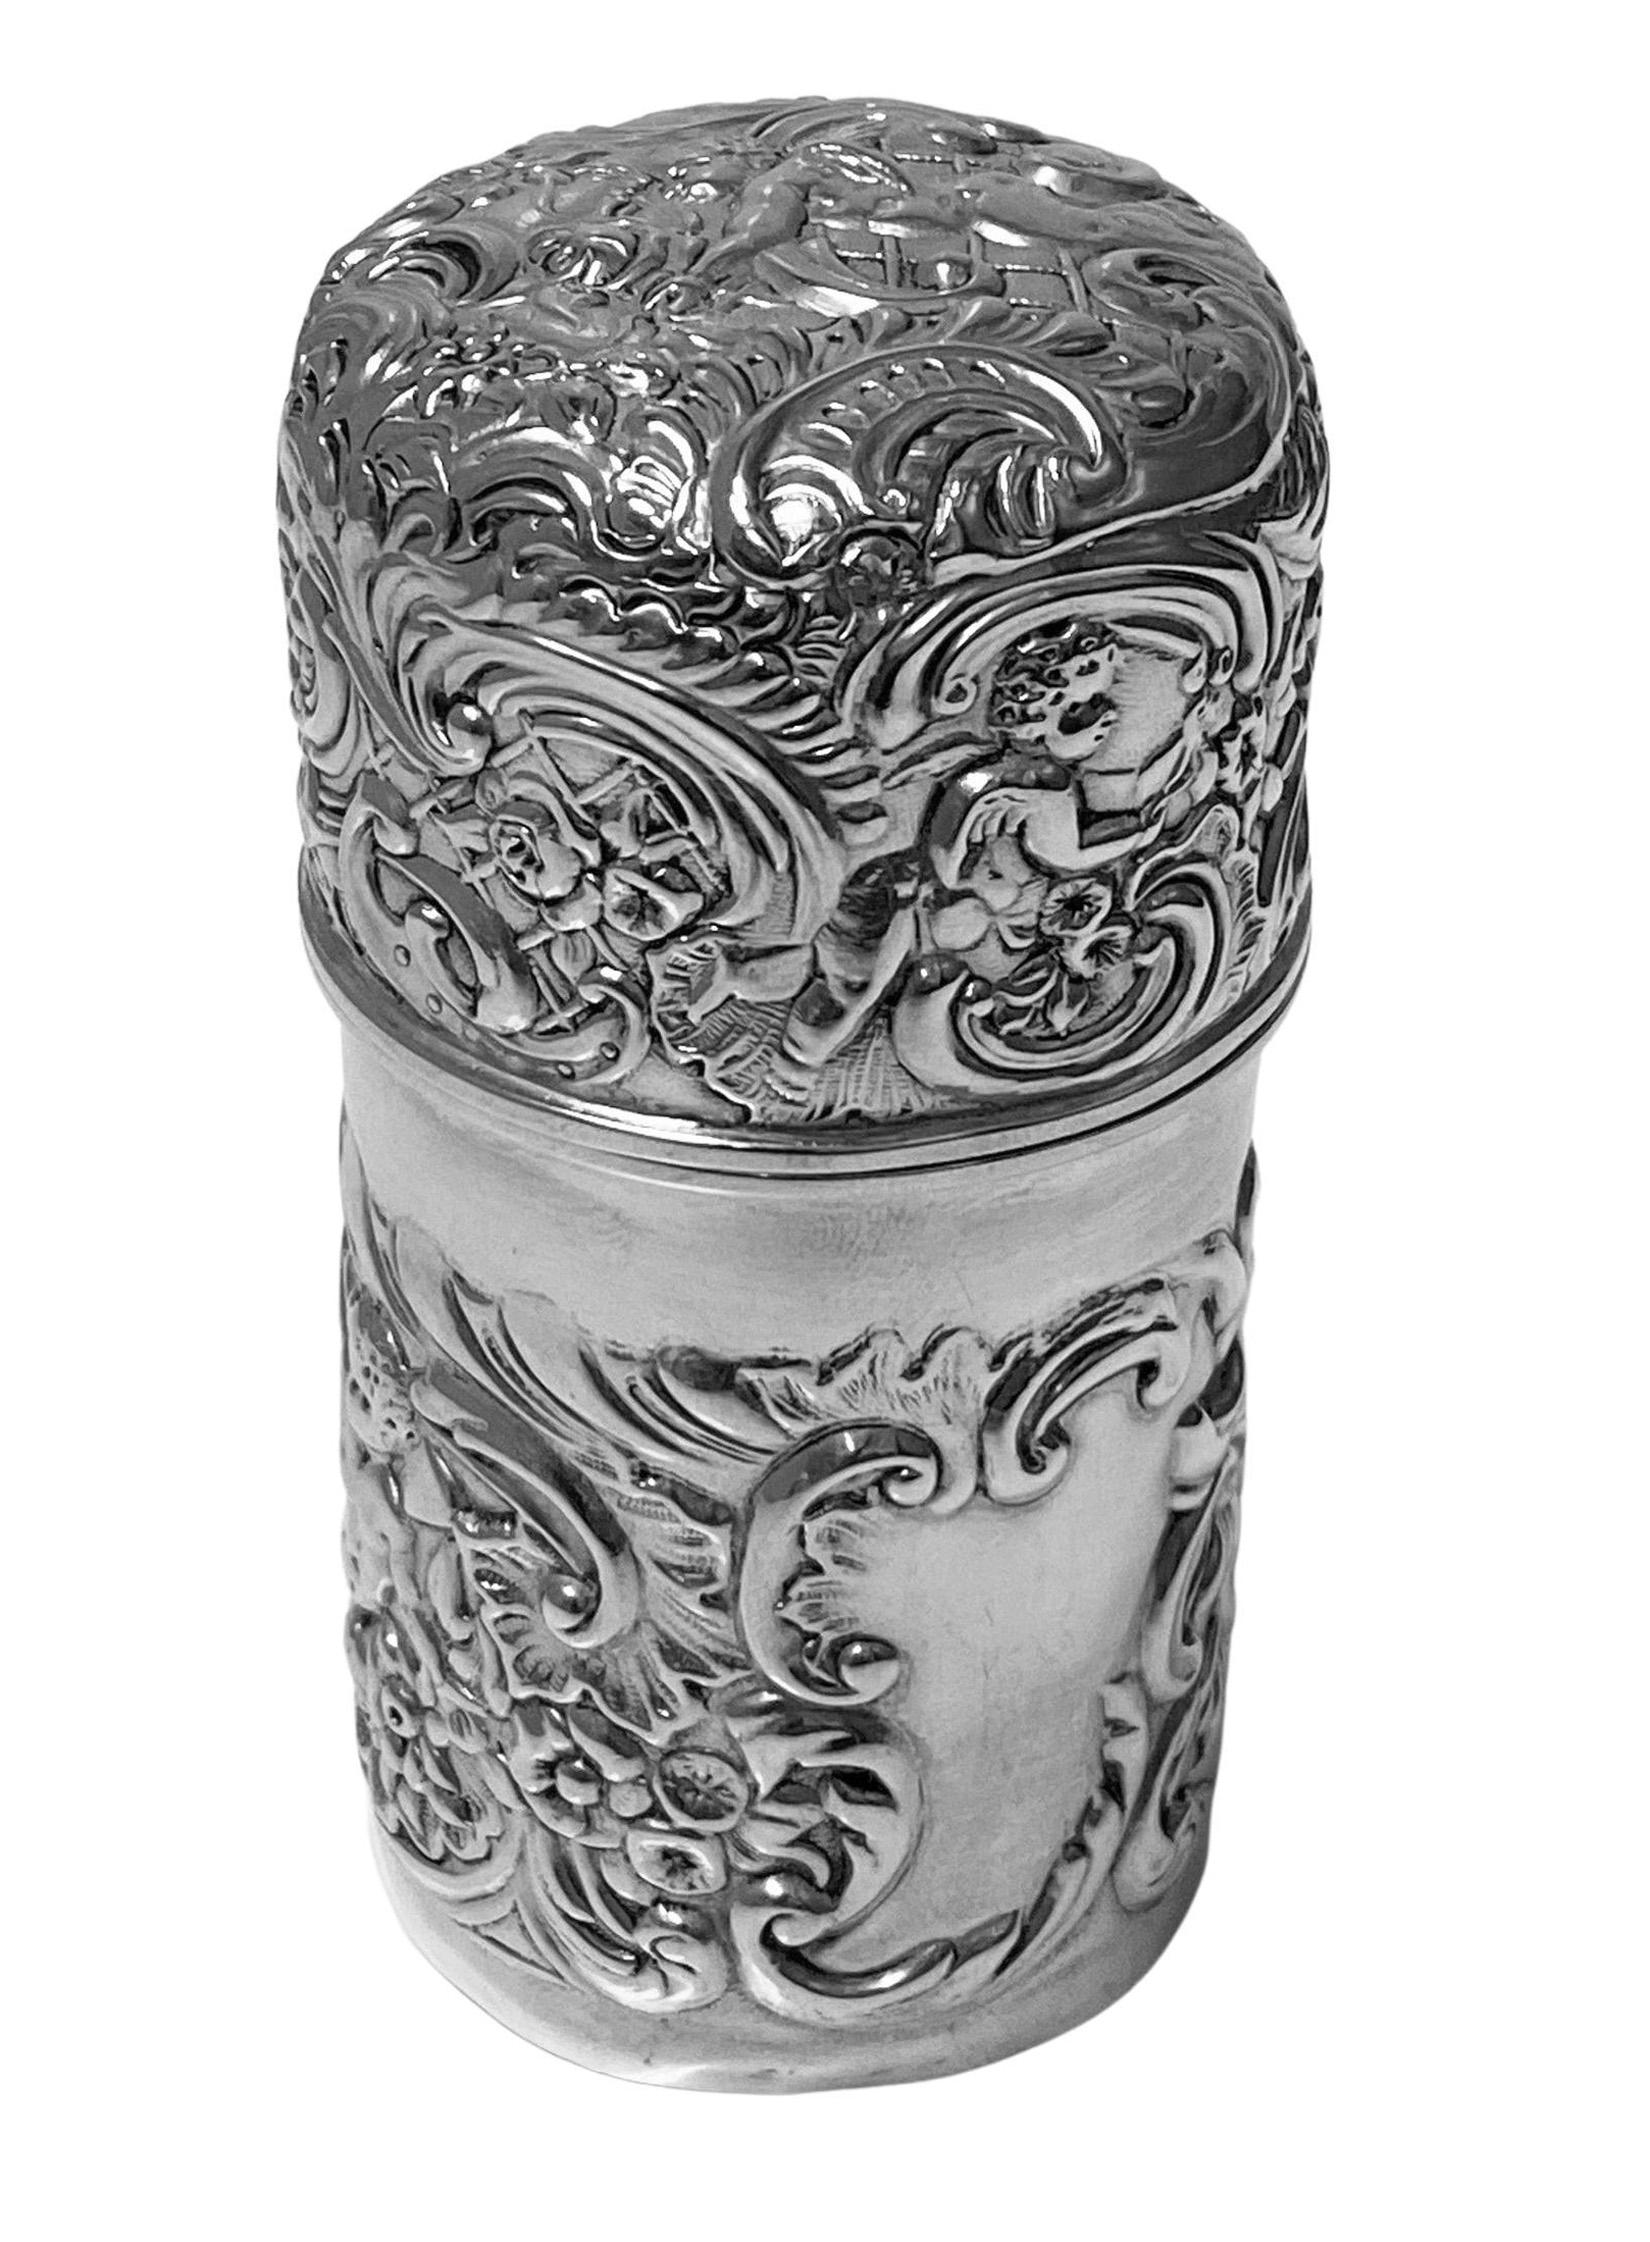 Antique silver scent bottle with removeable glass interior, London 1895 William Comyns. Cylindrical form decorated with putti cherub and angels amidst foliage, vacant cartouche to front. Hinged cover, gilded interior with removeable clear glass